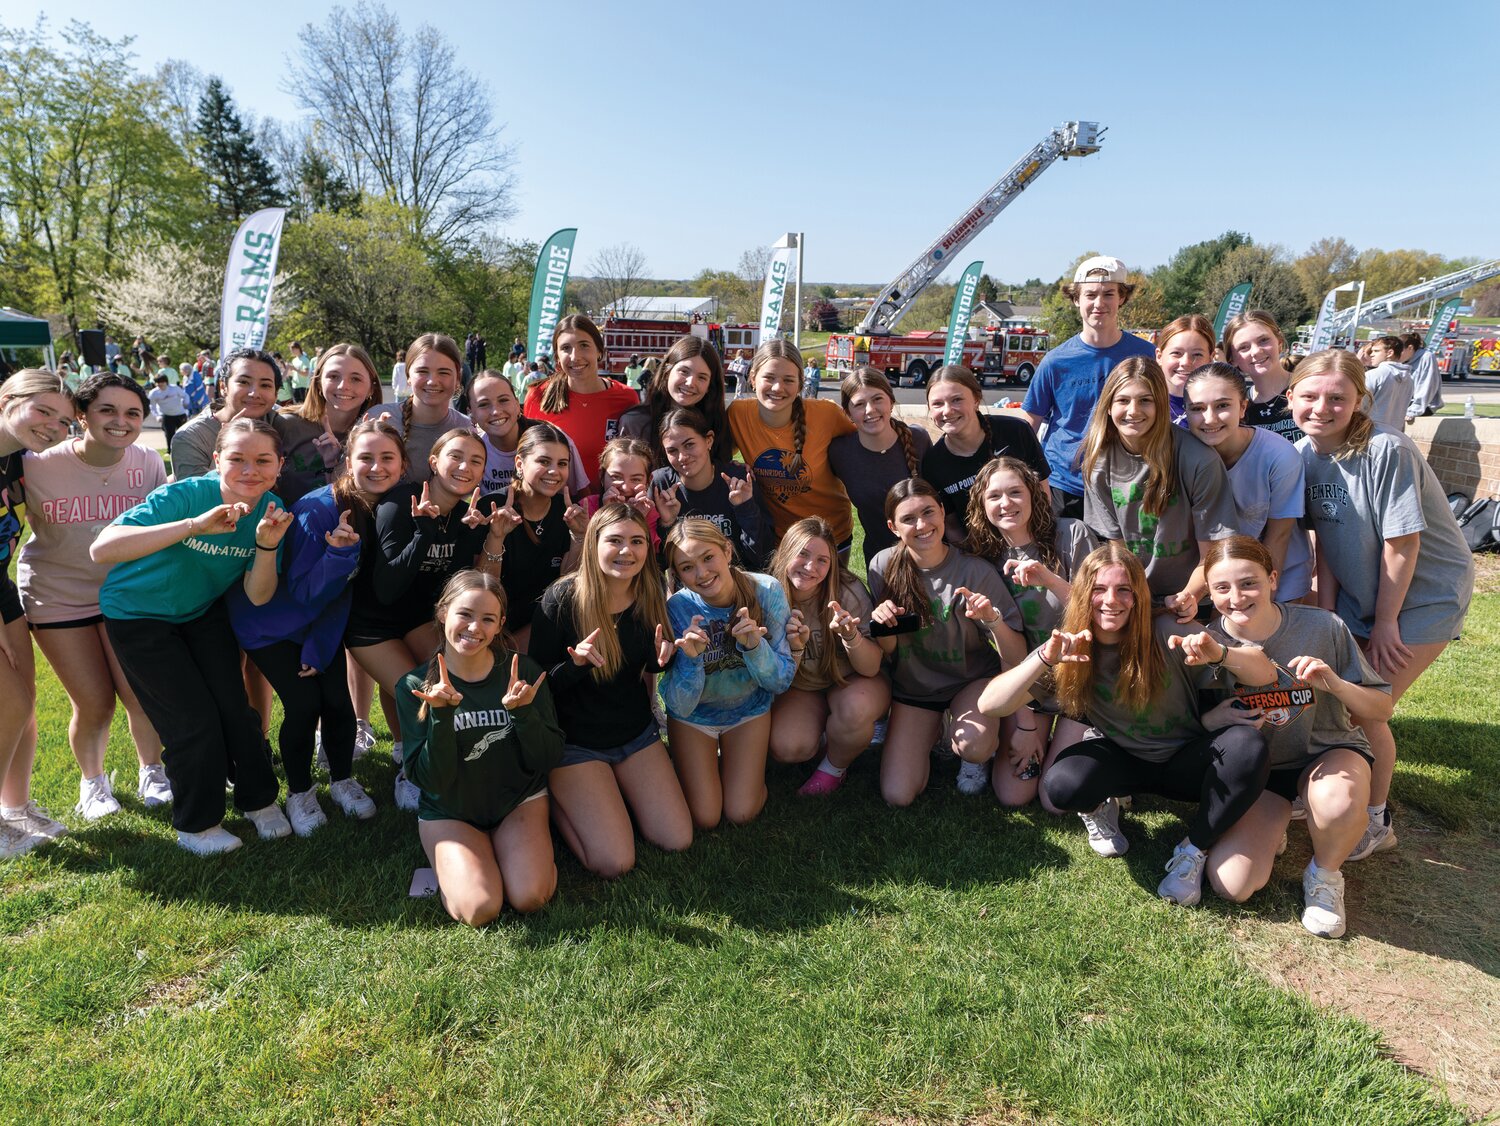 Students gather at the April Showers event, hosted by the Unified Pennridge Club, which provides opportunities for those with and without disabilities to participate together in club activities and sports.